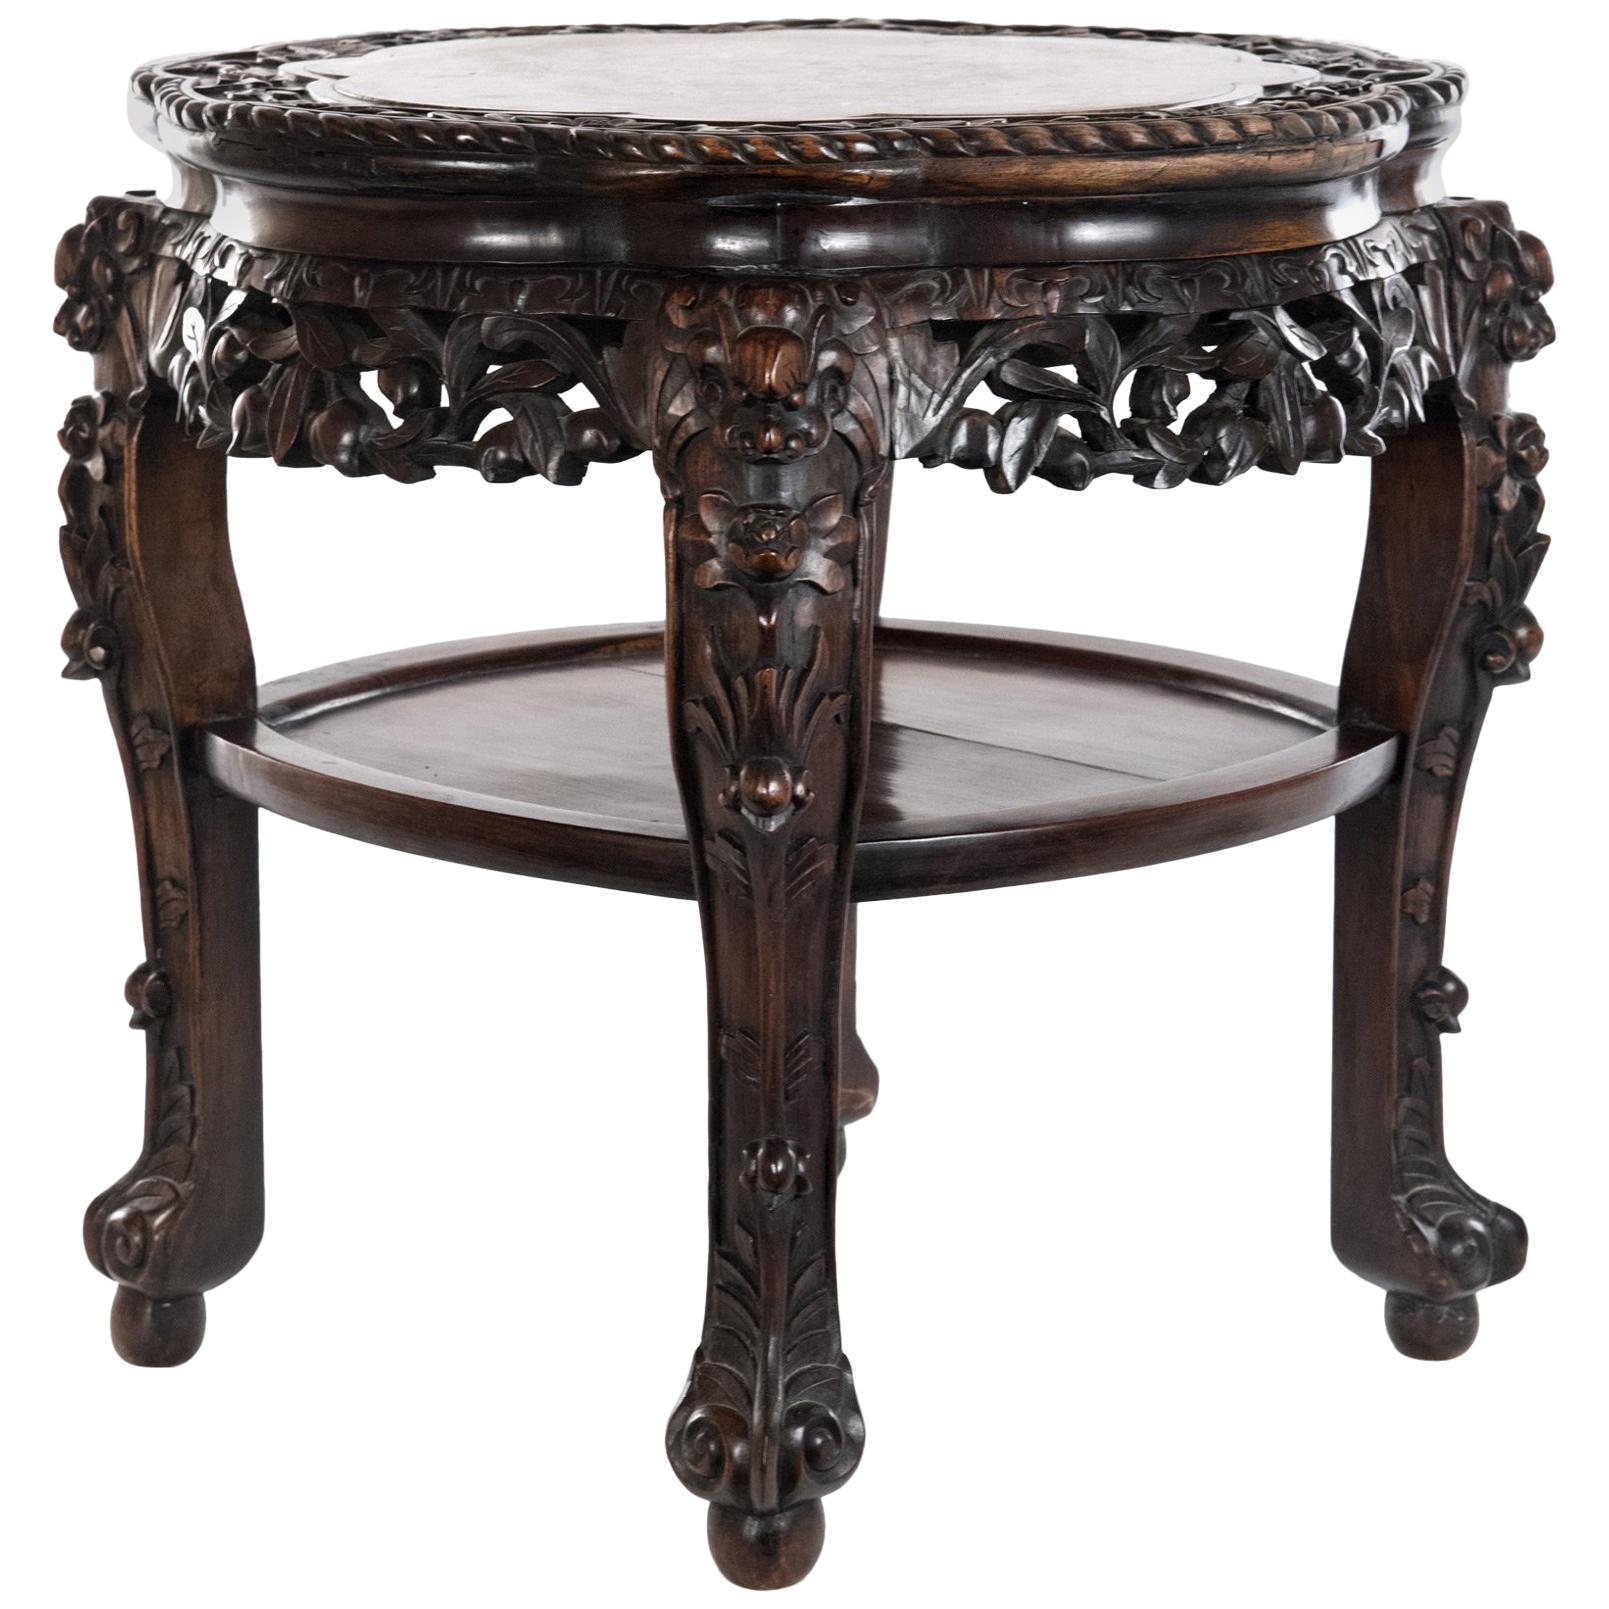 Chinese Carved Rosewood and Marble Captured-Top Table